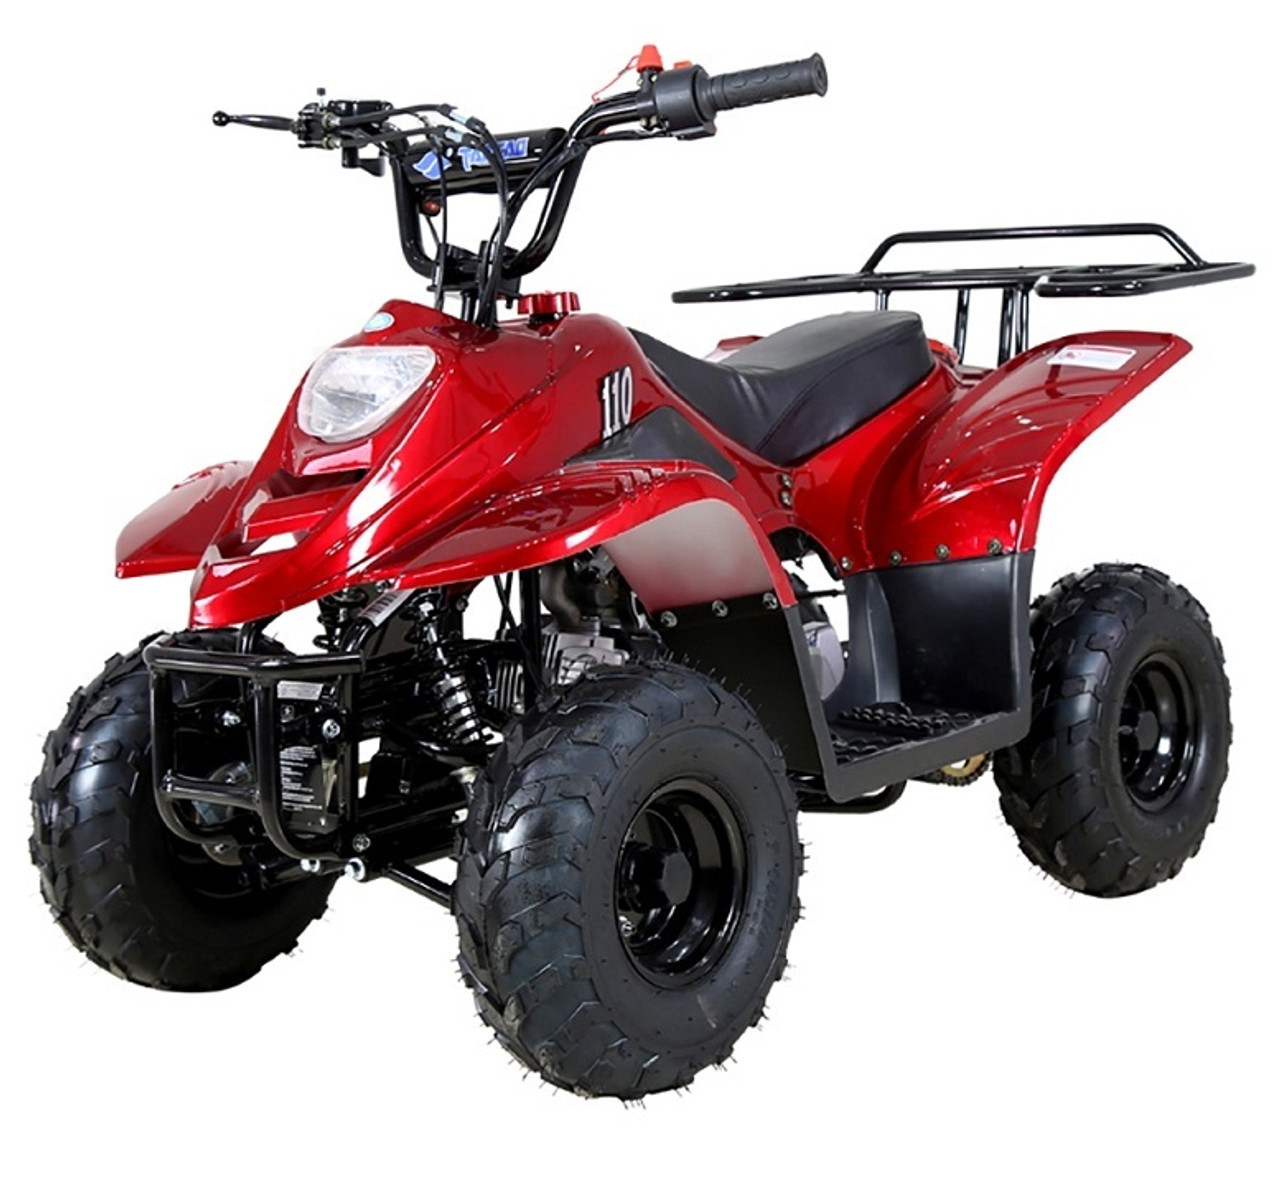 Taotao Boulder B1 110CC Small Kids ATV - Air Cooled, 4-Stroke, 1-Cylinder, Automatic - Fully Assembled and Tested